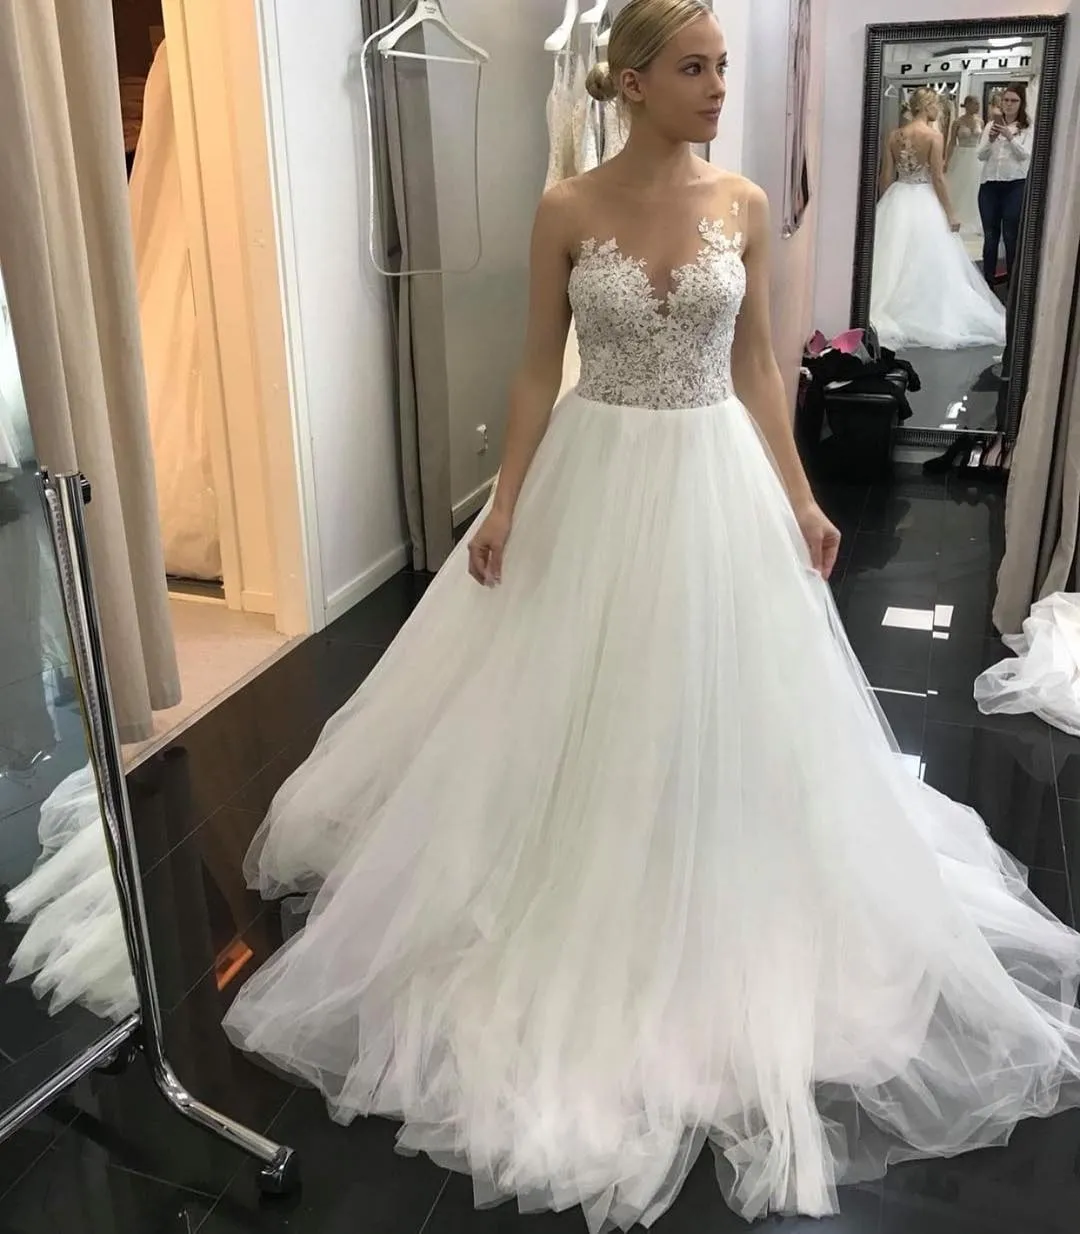 Sexy Romantic Boho Beach A Line Country Wedding Dresses Sheer Neck Lace Applique Illusion Back Sweep Train Wedding Dress Bridal Gowns